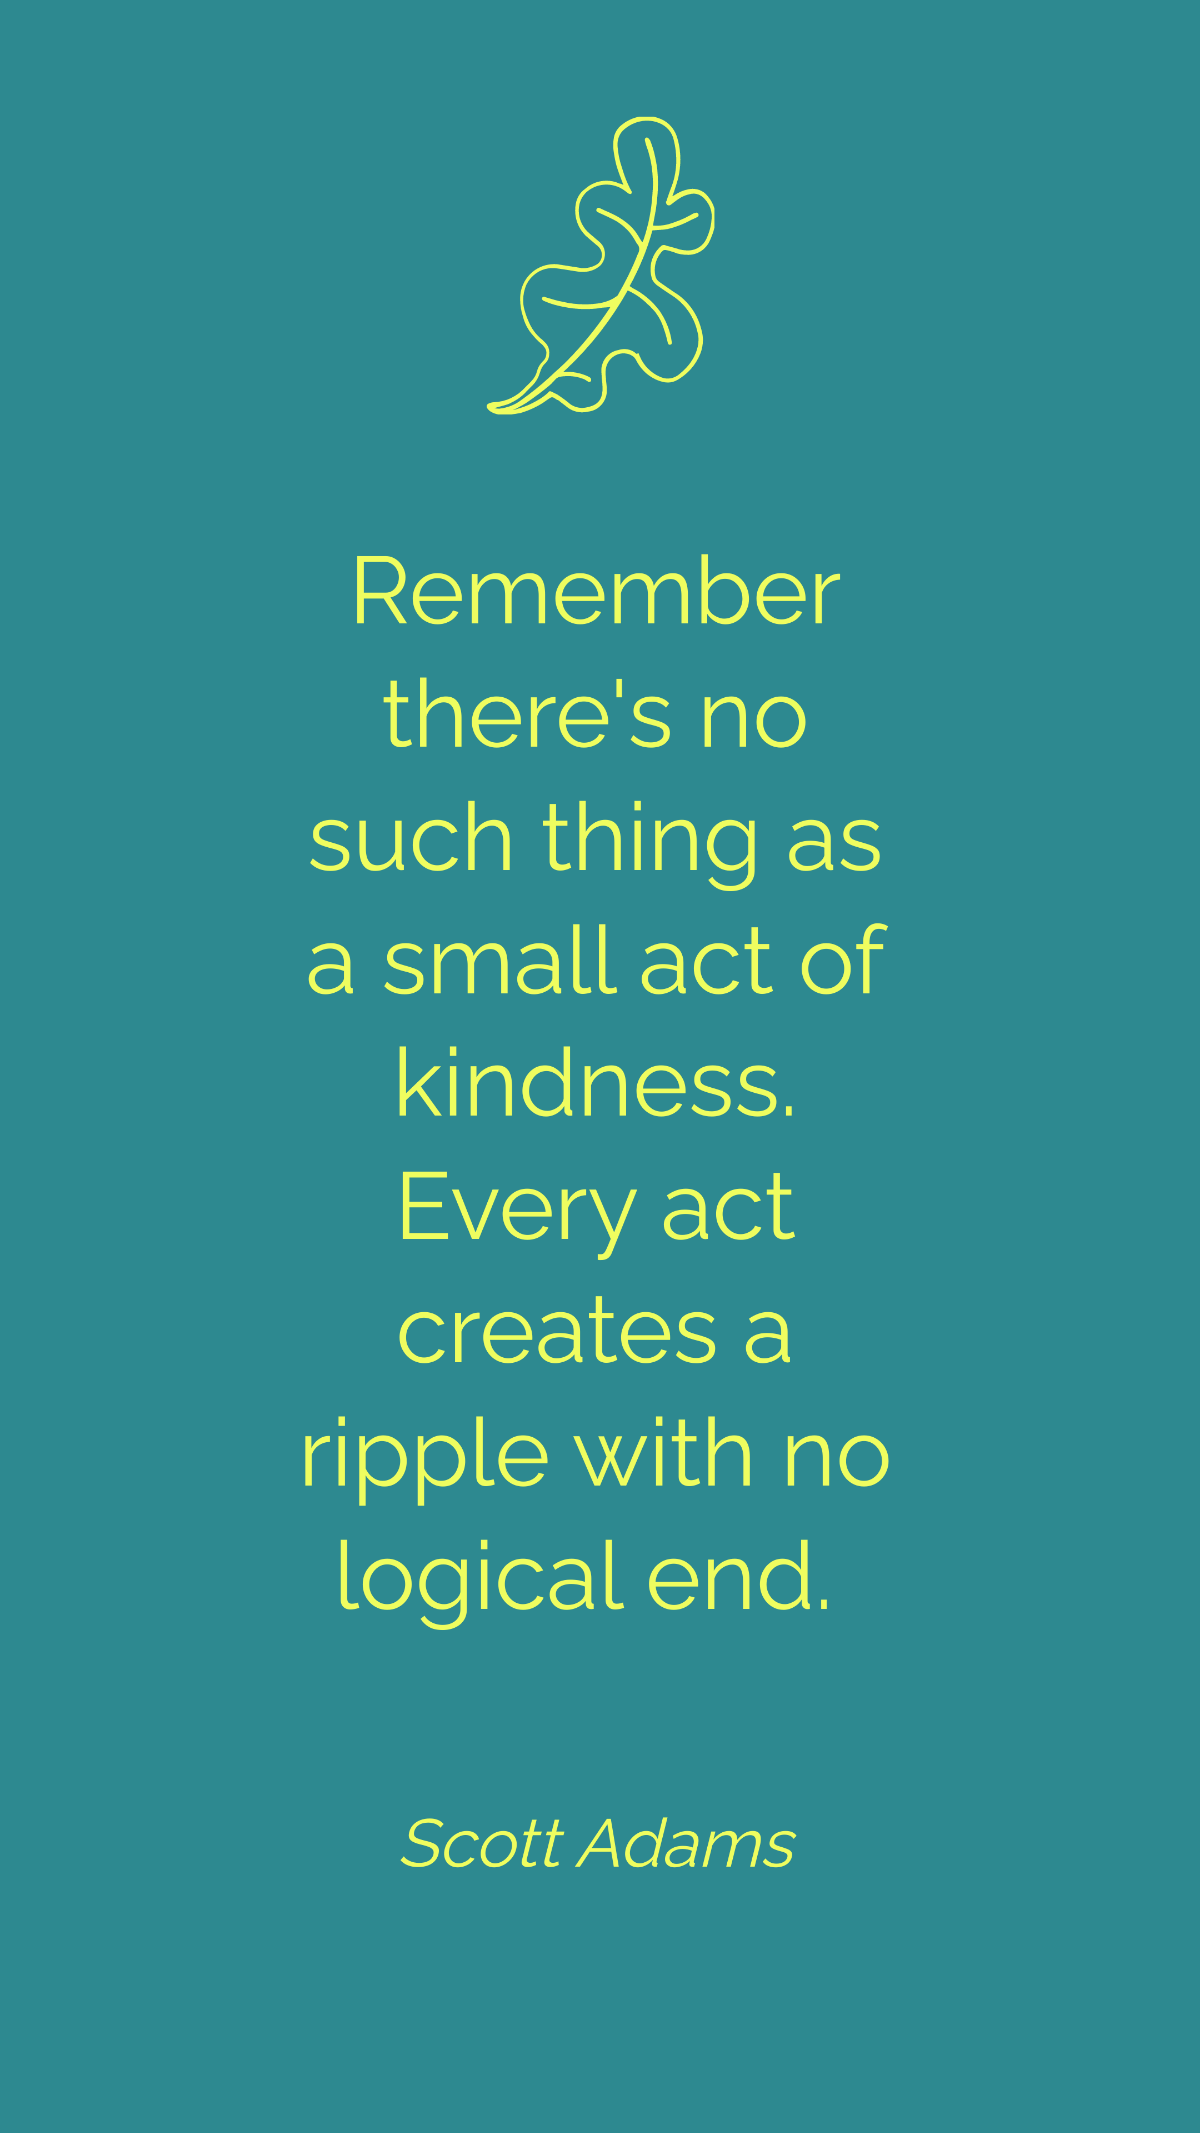 Scott Adams - Remember there's no such thing as a small act of kindness. Every act creates a ripple with no logical end. 